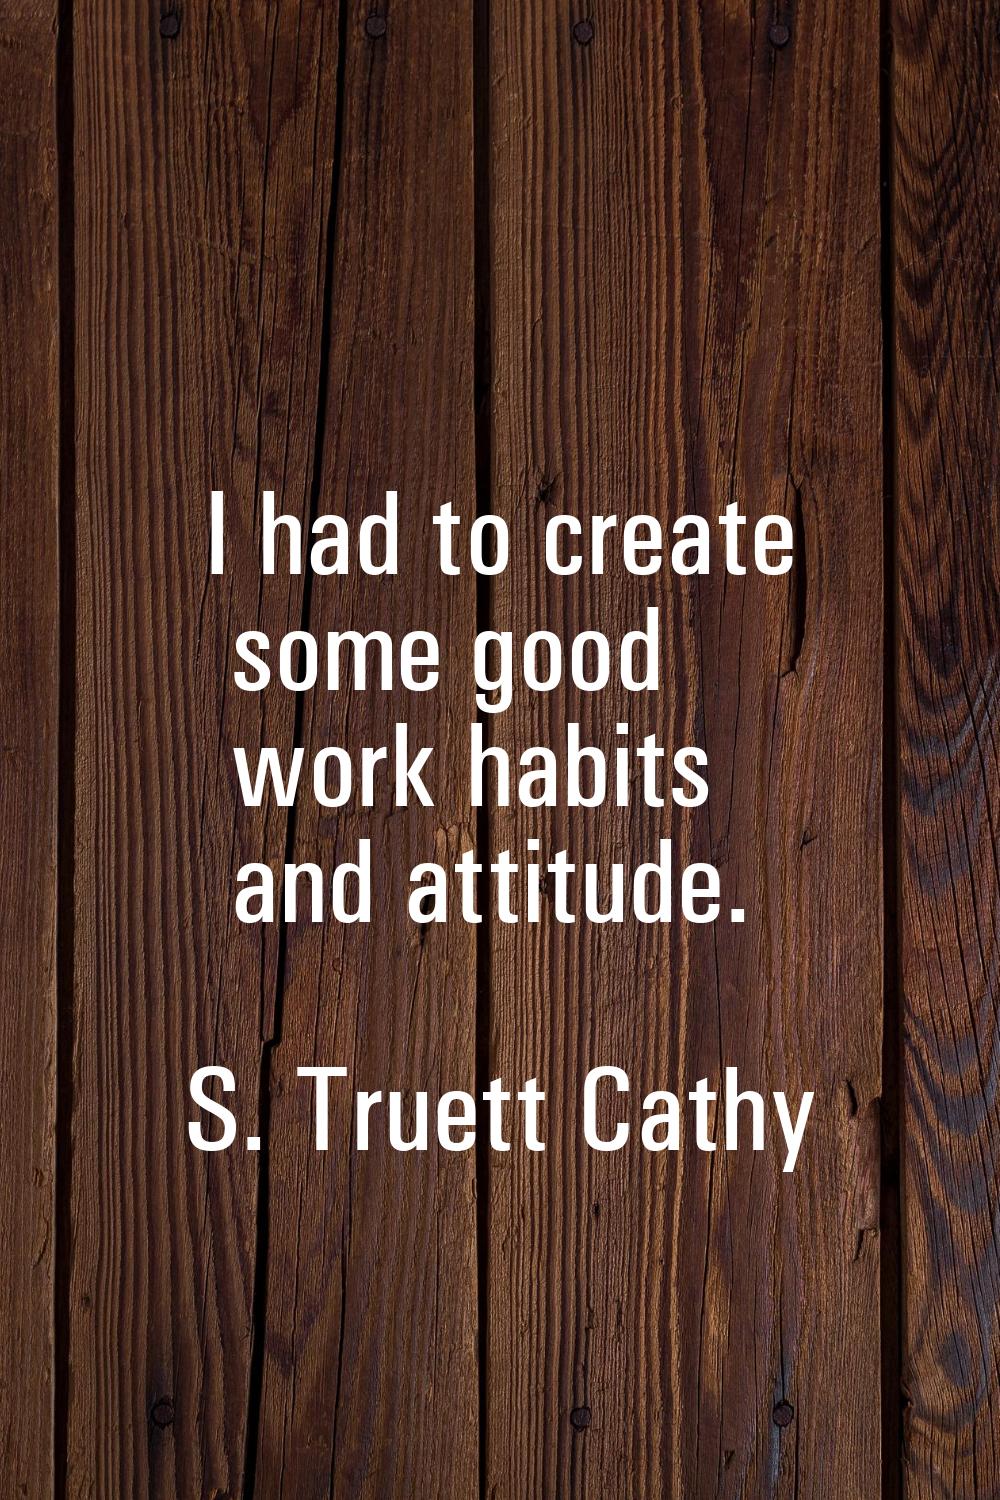 I had to create some good work habits and attitude.